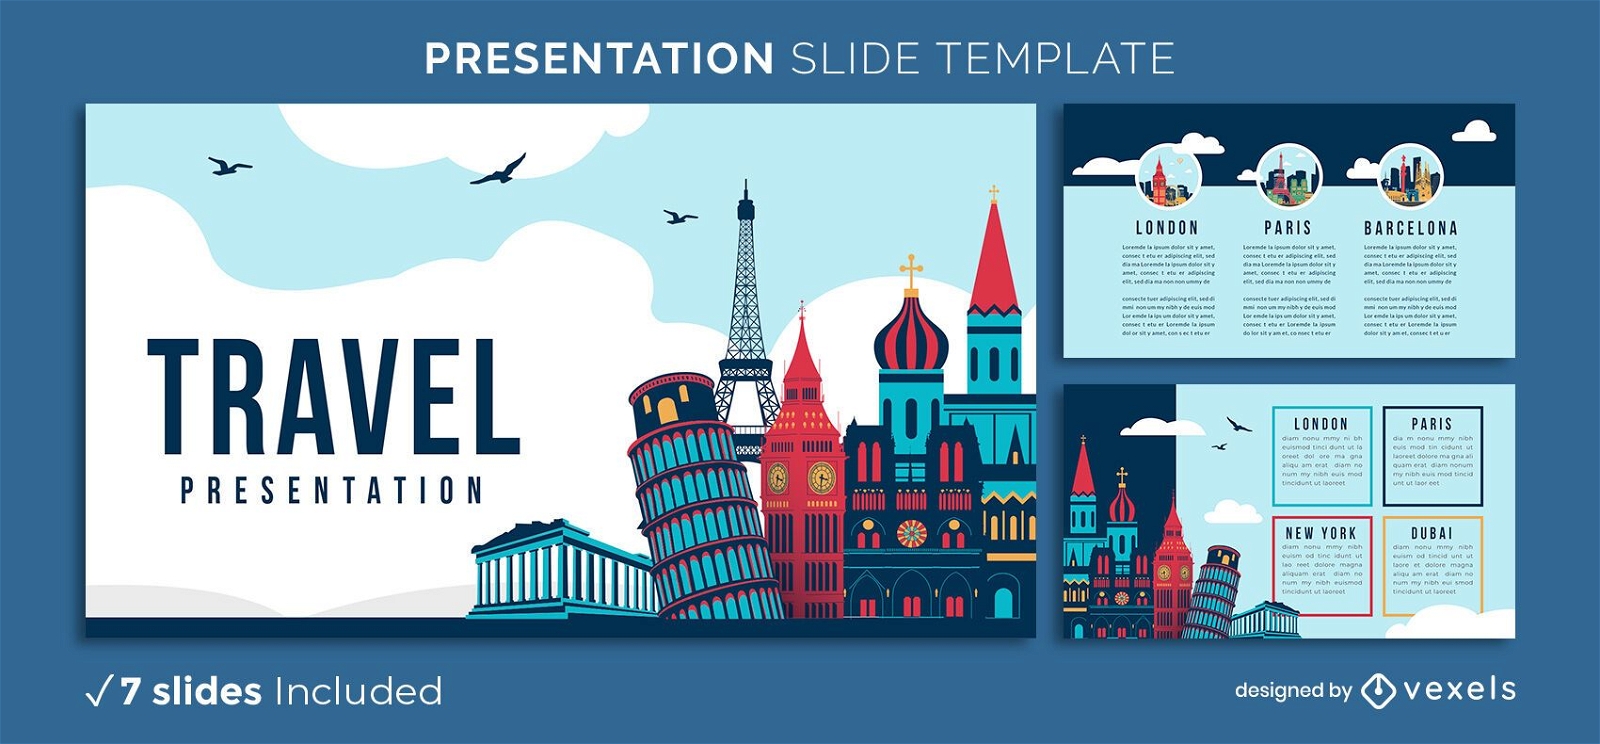 Tourism Powerpoint Template